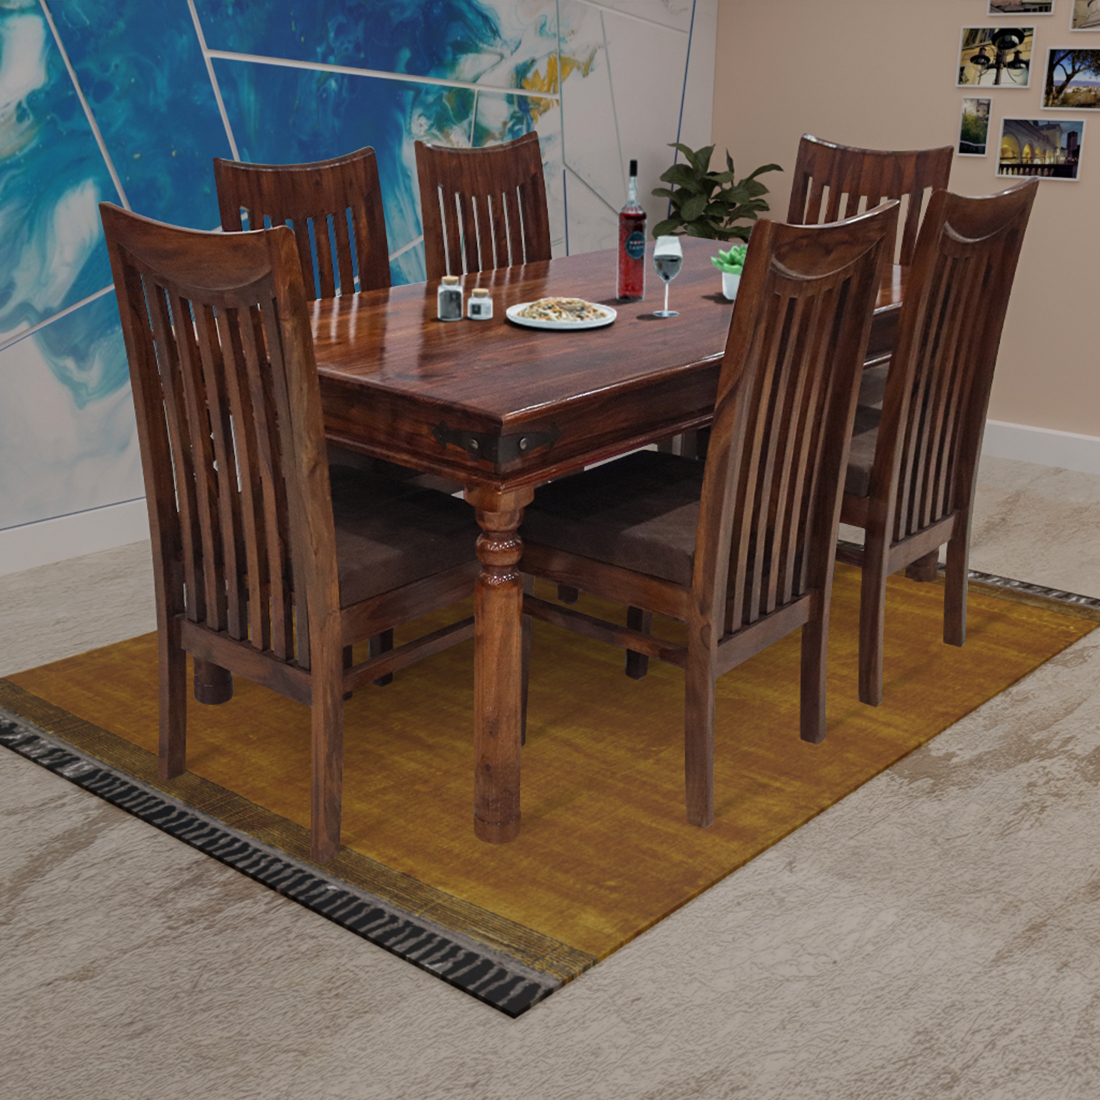 Sheesham Wood Teak Brown Finish Dining Table with 6 Seater Chairs